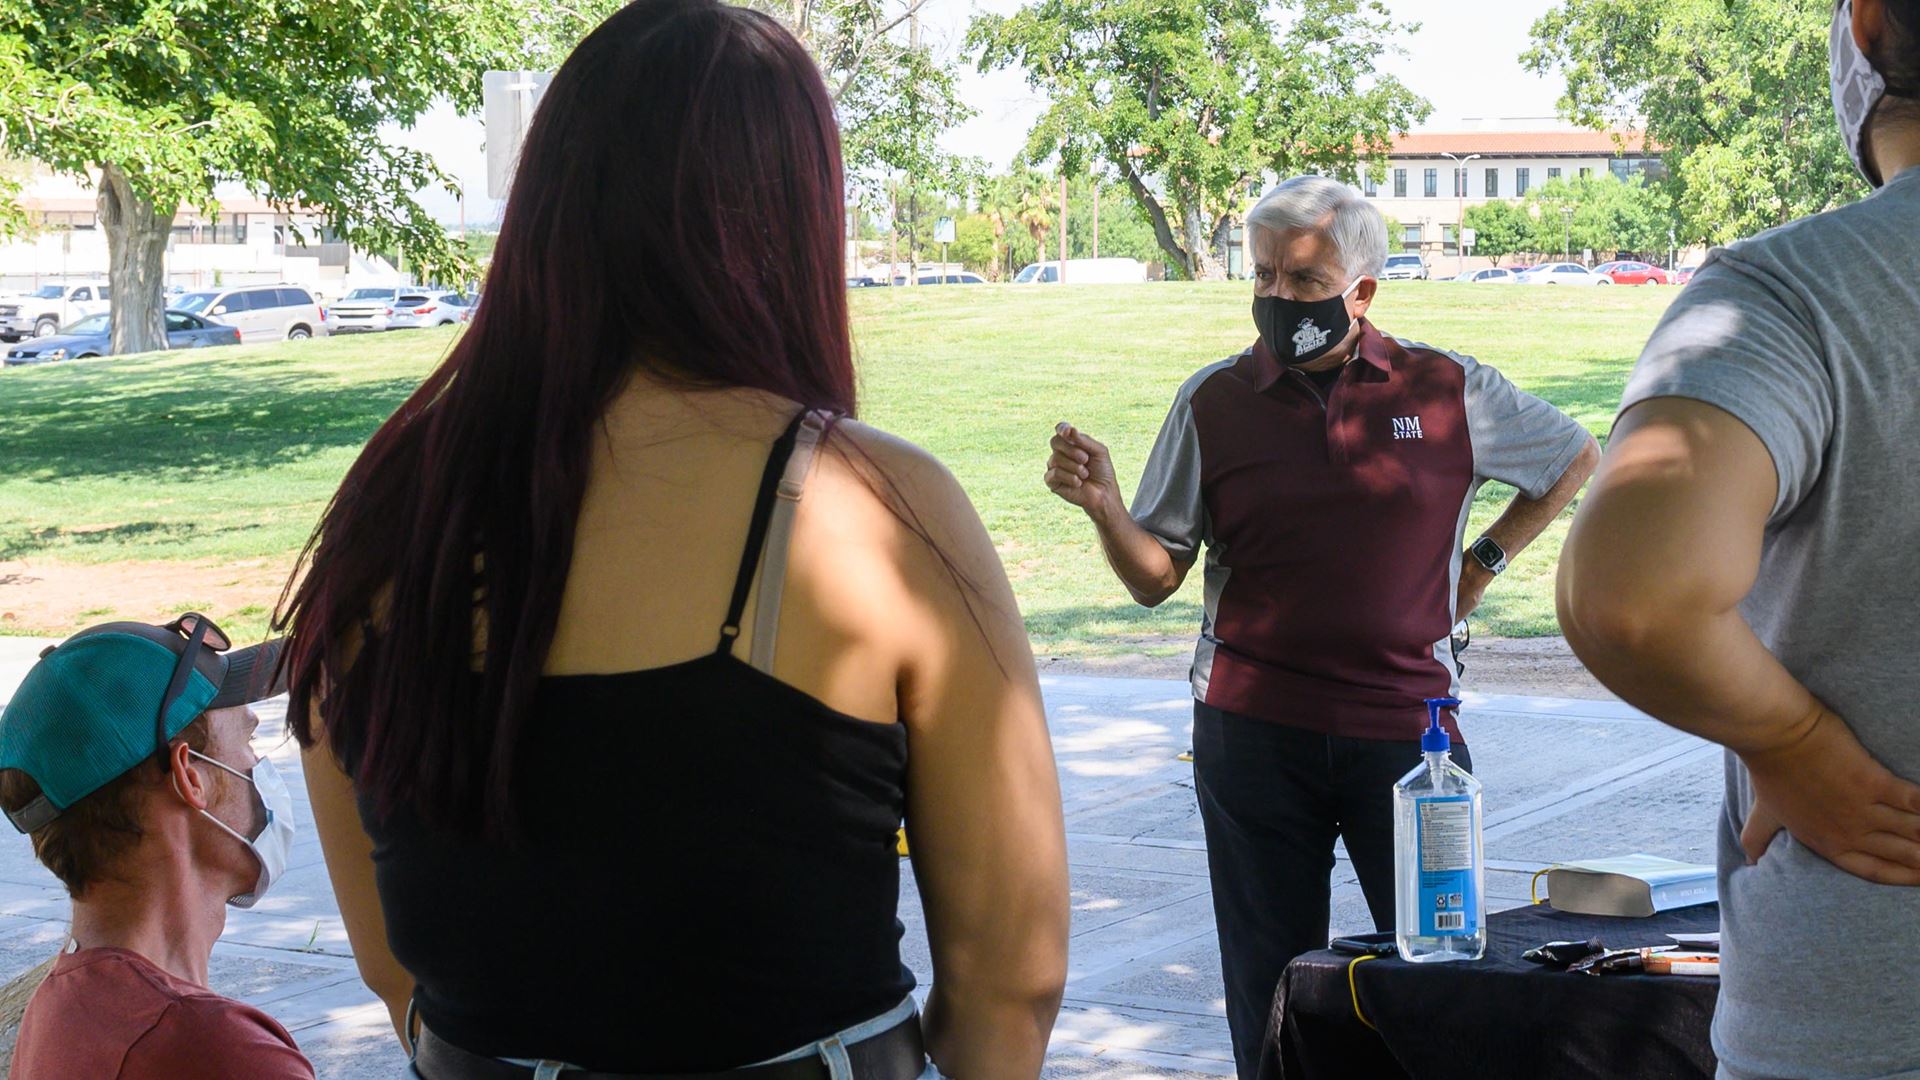 NMSU students back on campus for first time since March